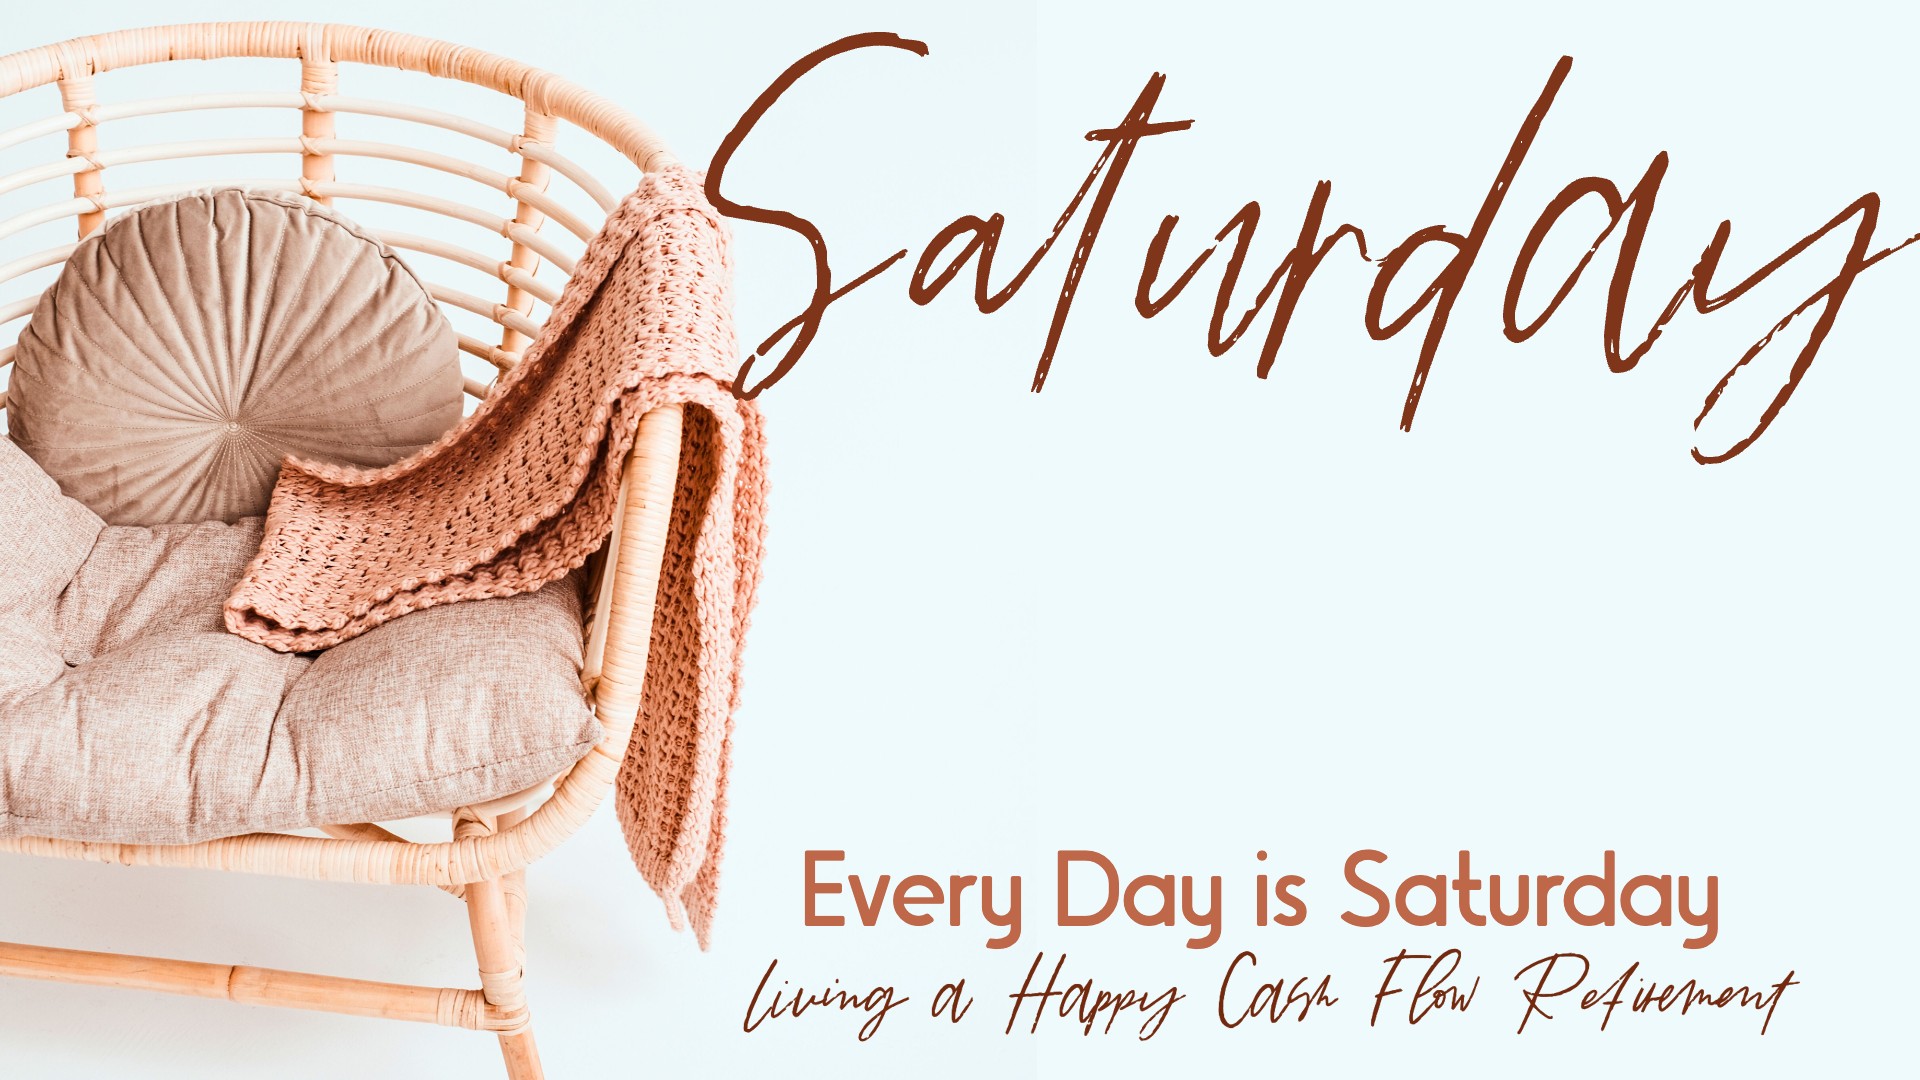 Every Day is Saturday: Living a Happy Cash Flow Retirement